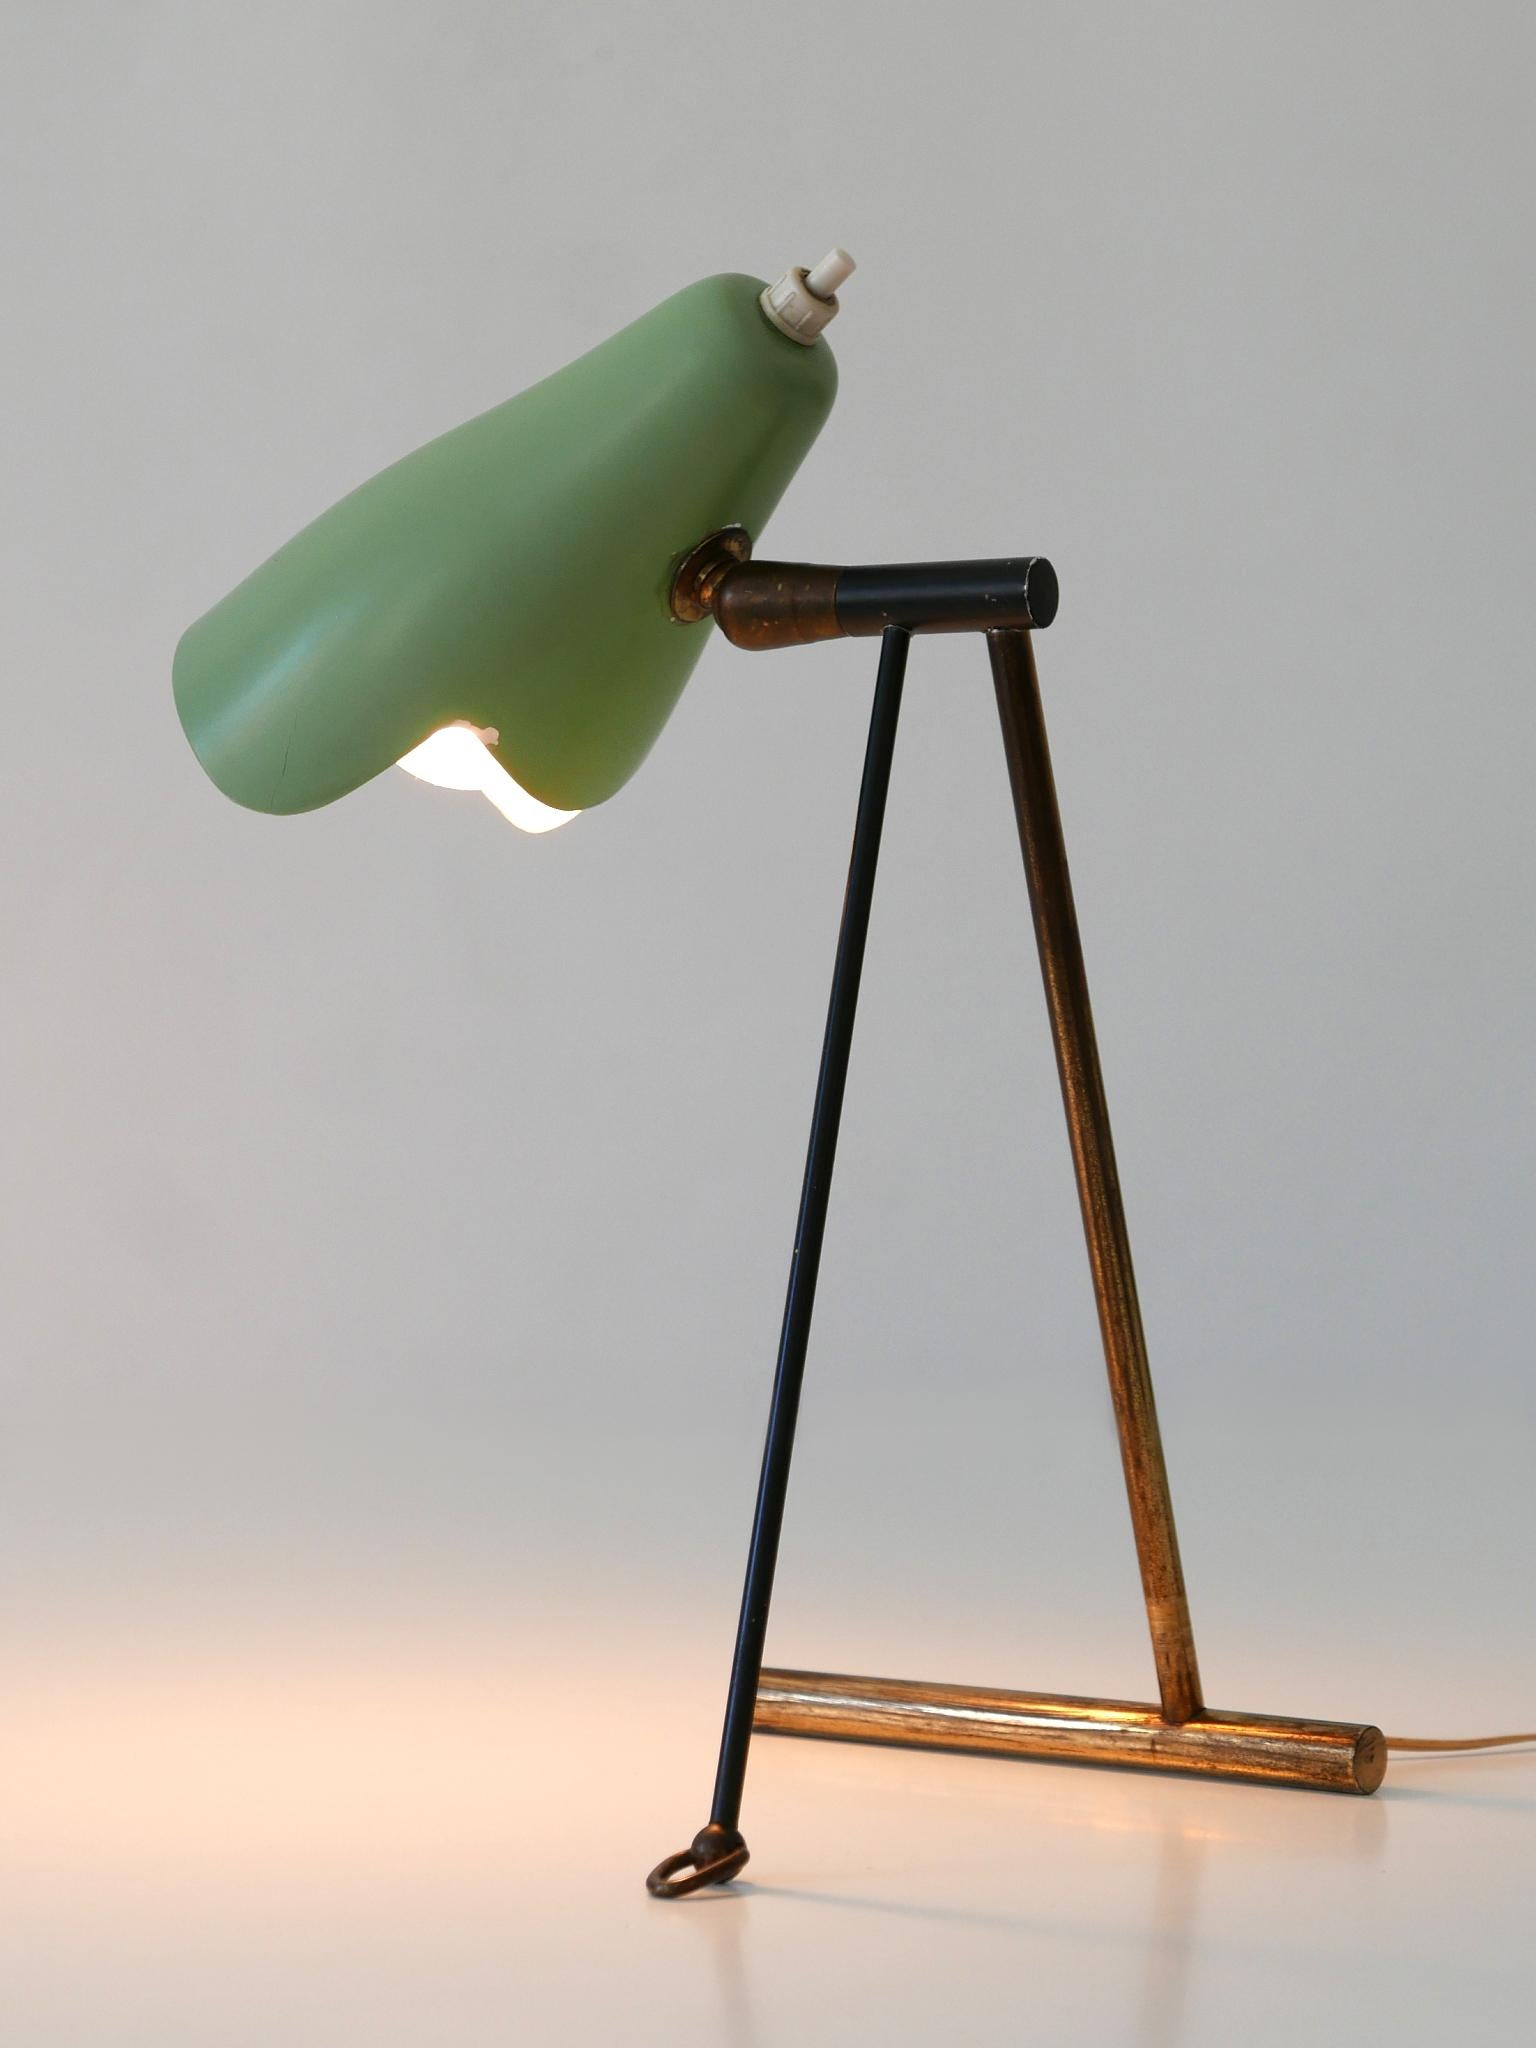 Extremely rare and elegant Mid-Century Modern table / wall lamp by Stilnovo, Itlay, 1950. With adjustable diffusor in original green color. 

Executed in brass and painted aluminium, the table / wall lamp comes with 1 x E14 / 12 Edison screw fit